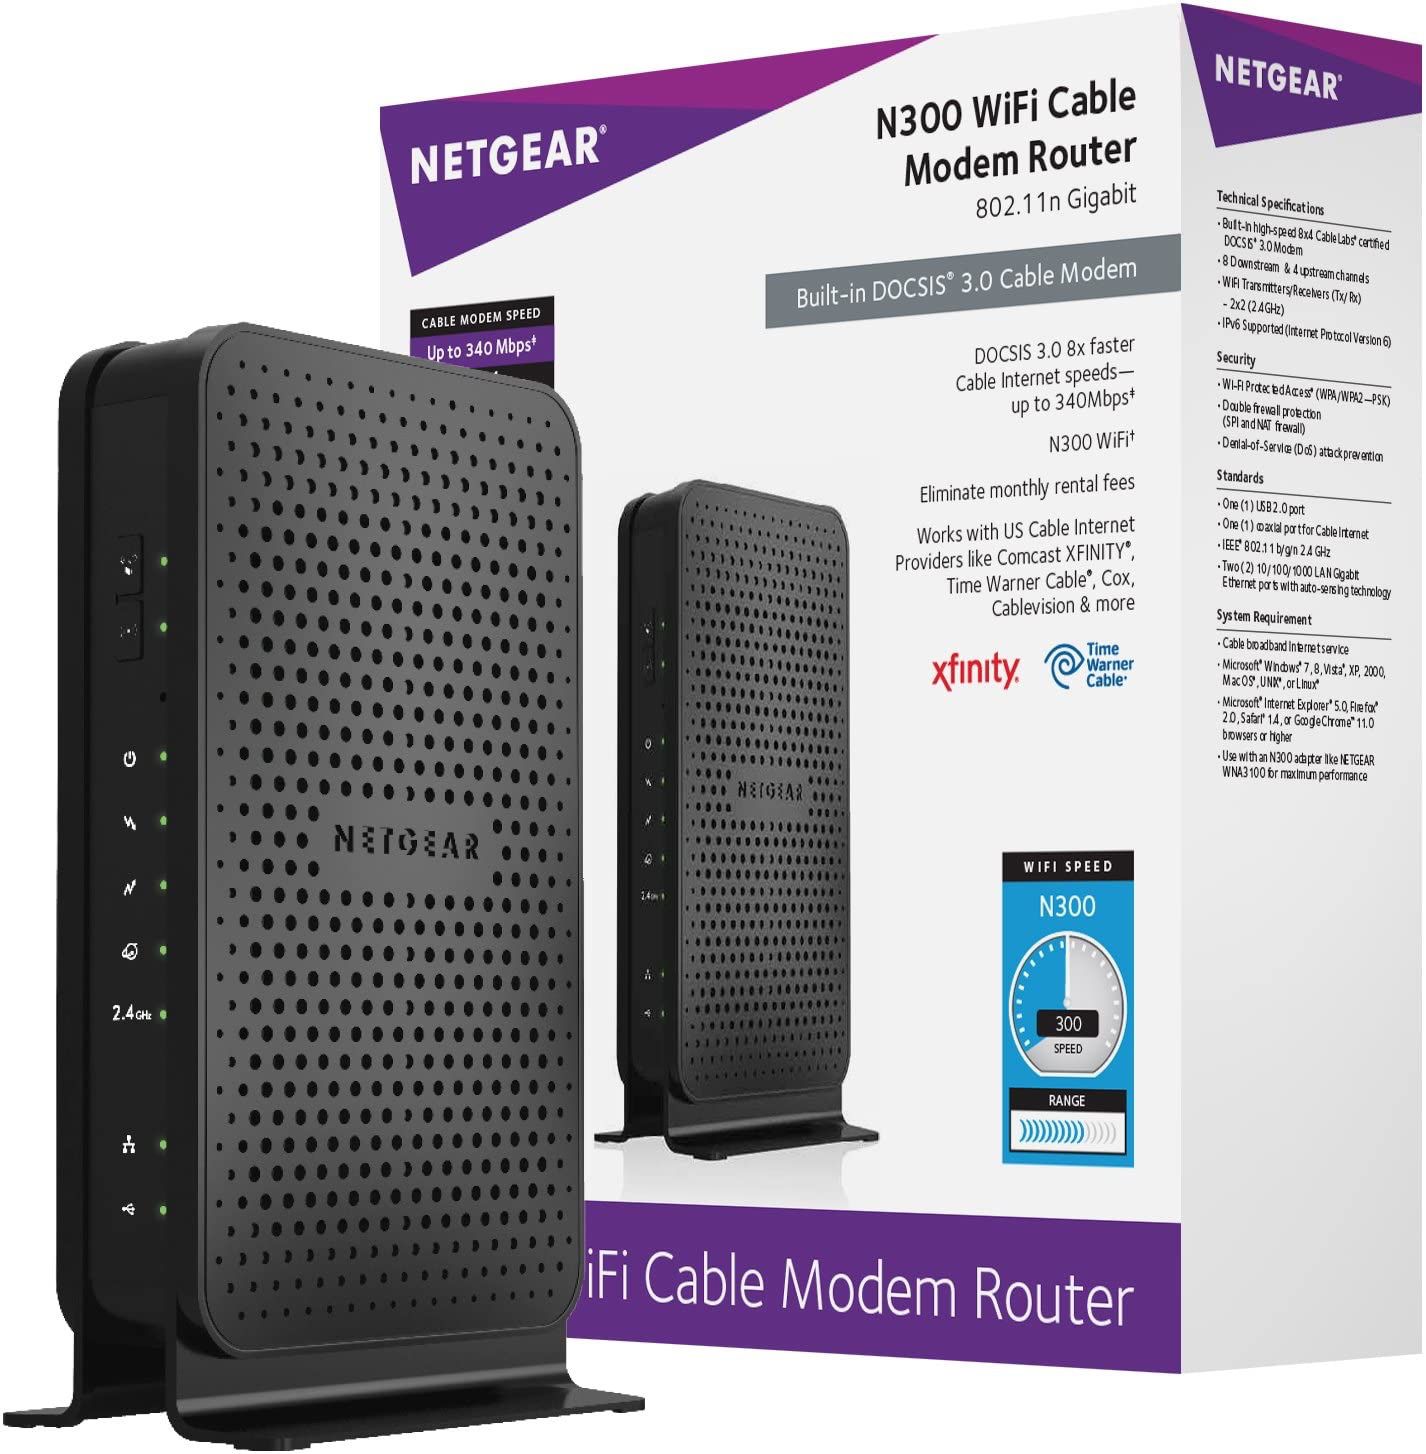 Modem/Router. Excellent condition and price